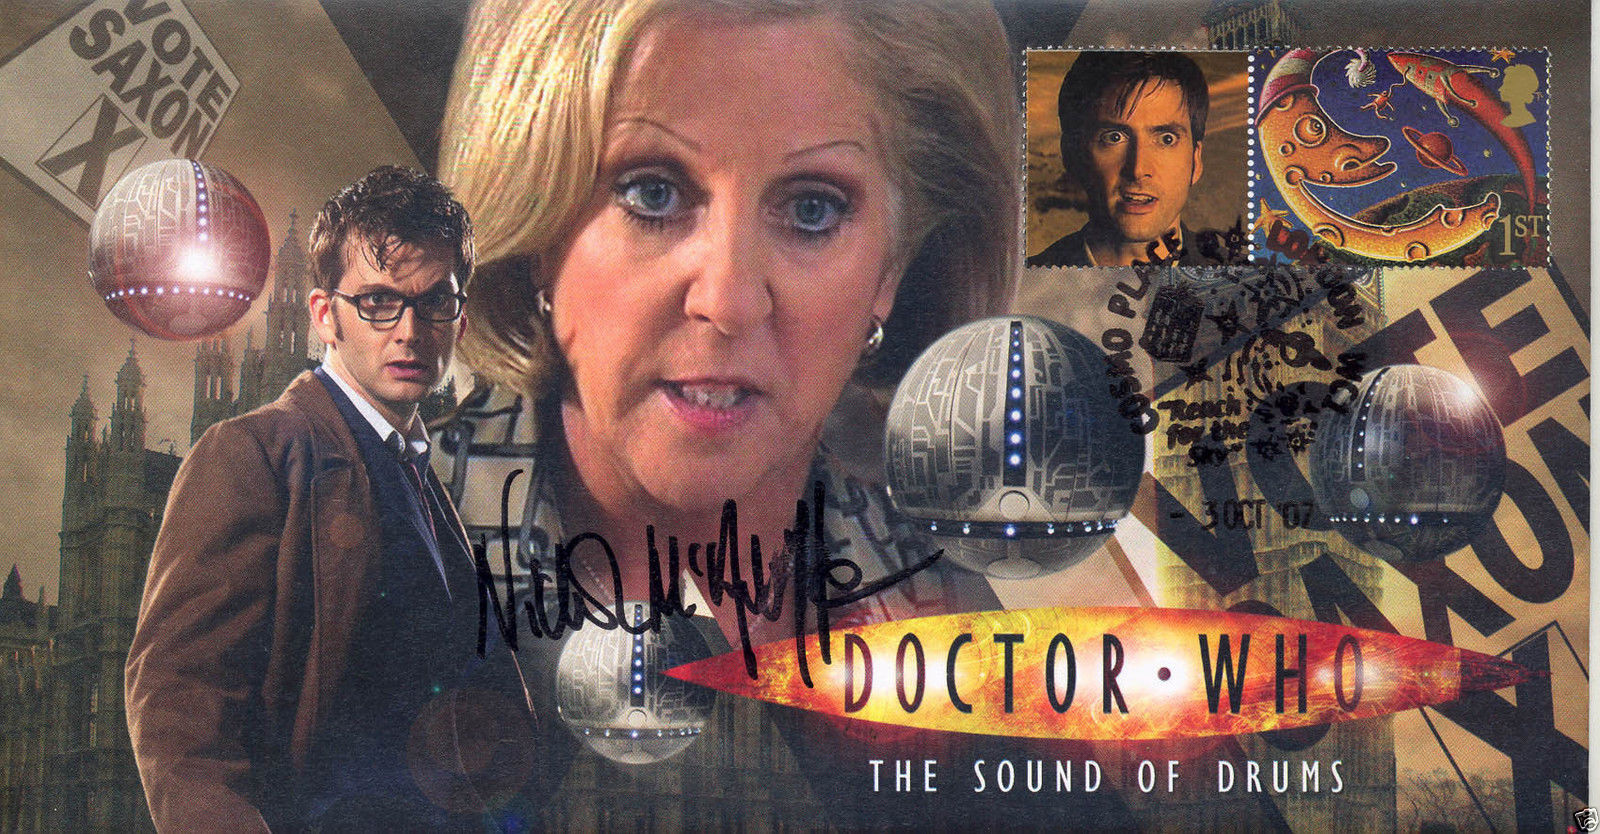 Doctor Who 2007 Series 3 Episode 12 Series The Sounds of Drums Collectible Stamp Cover Signed by NICOLA McAULIFFE